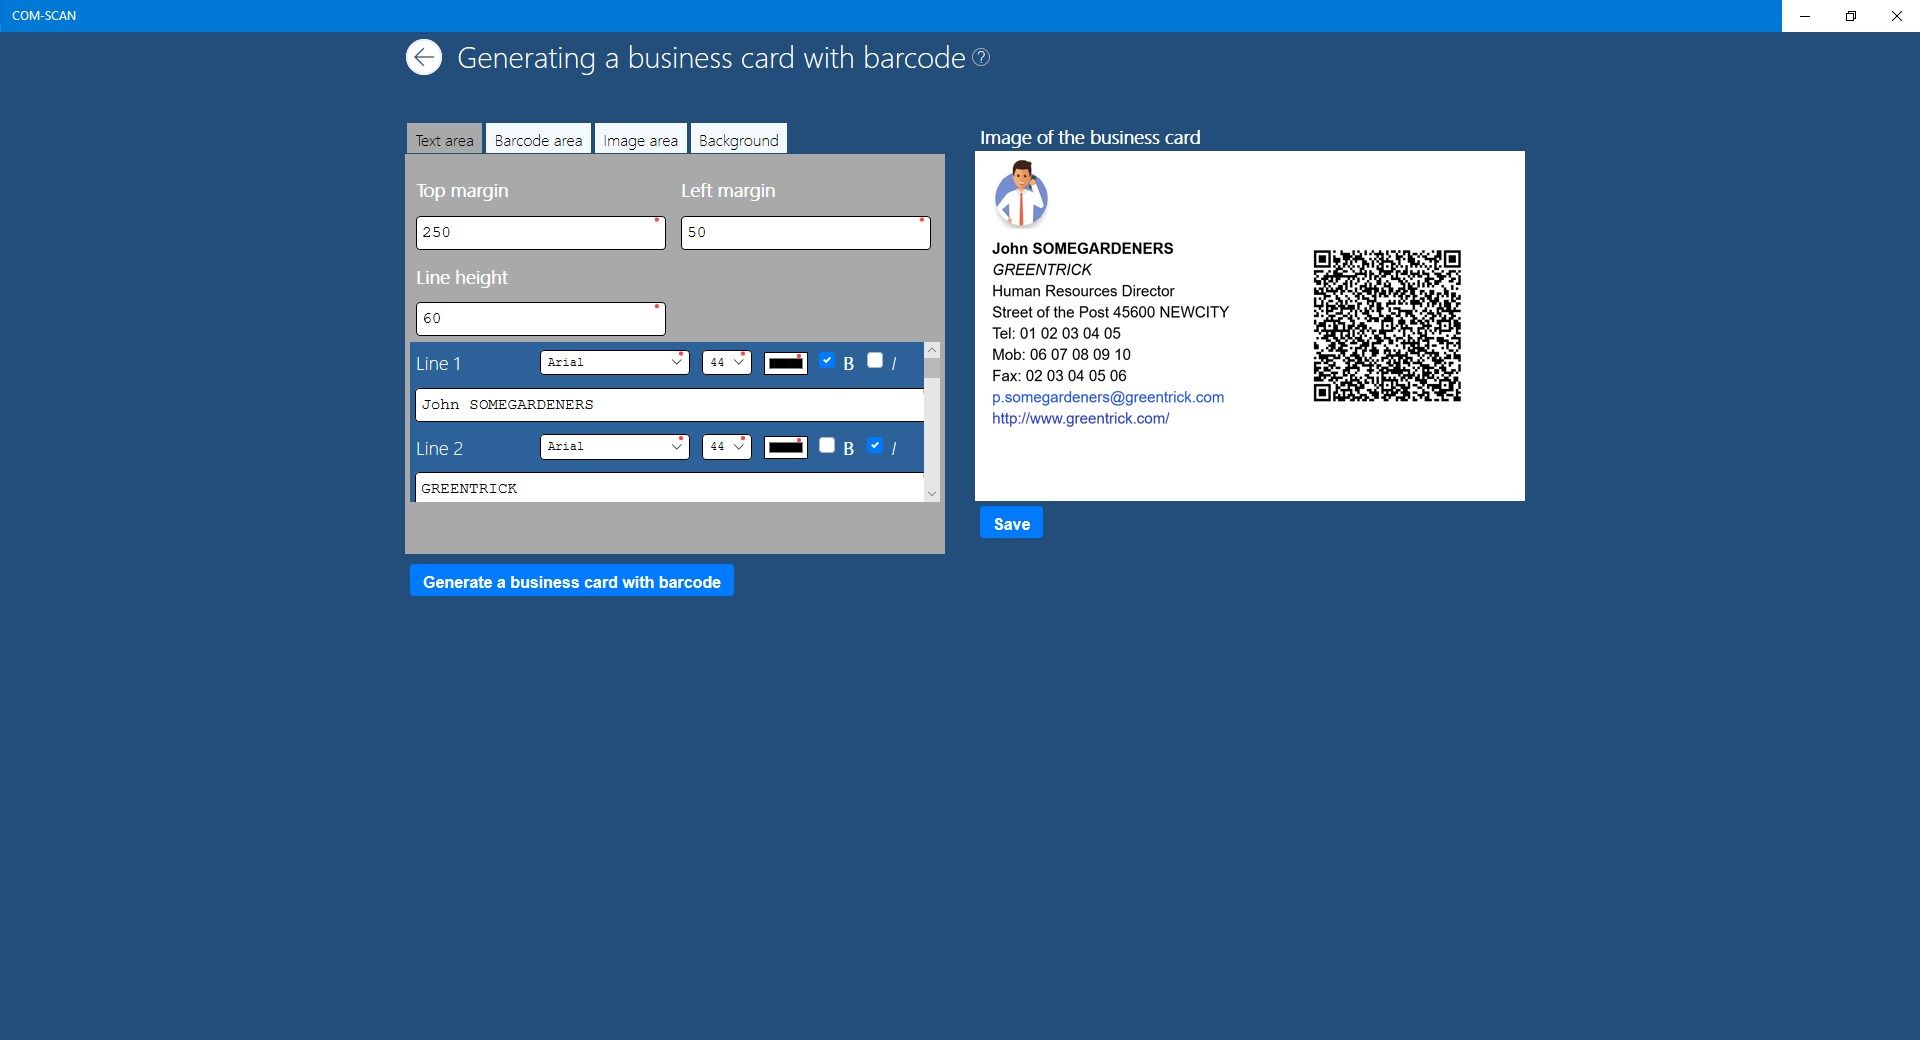 Generate business card generation with barcode